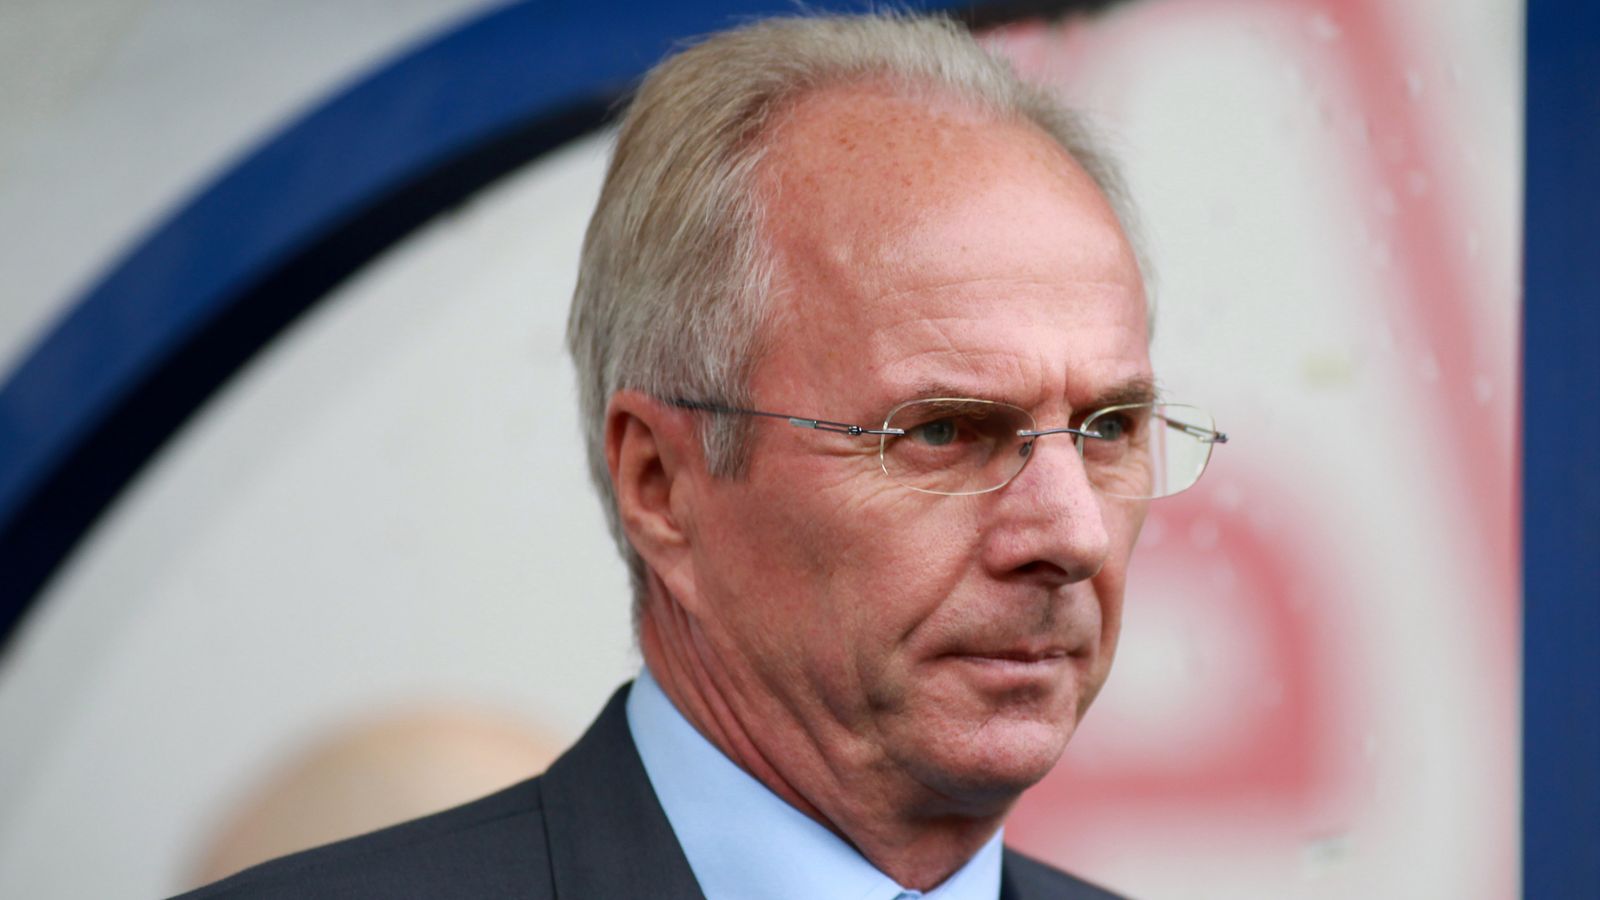 Sven-Goran Eriksson: Former England manager reveals cancer diagnosis and has 'a year to live'